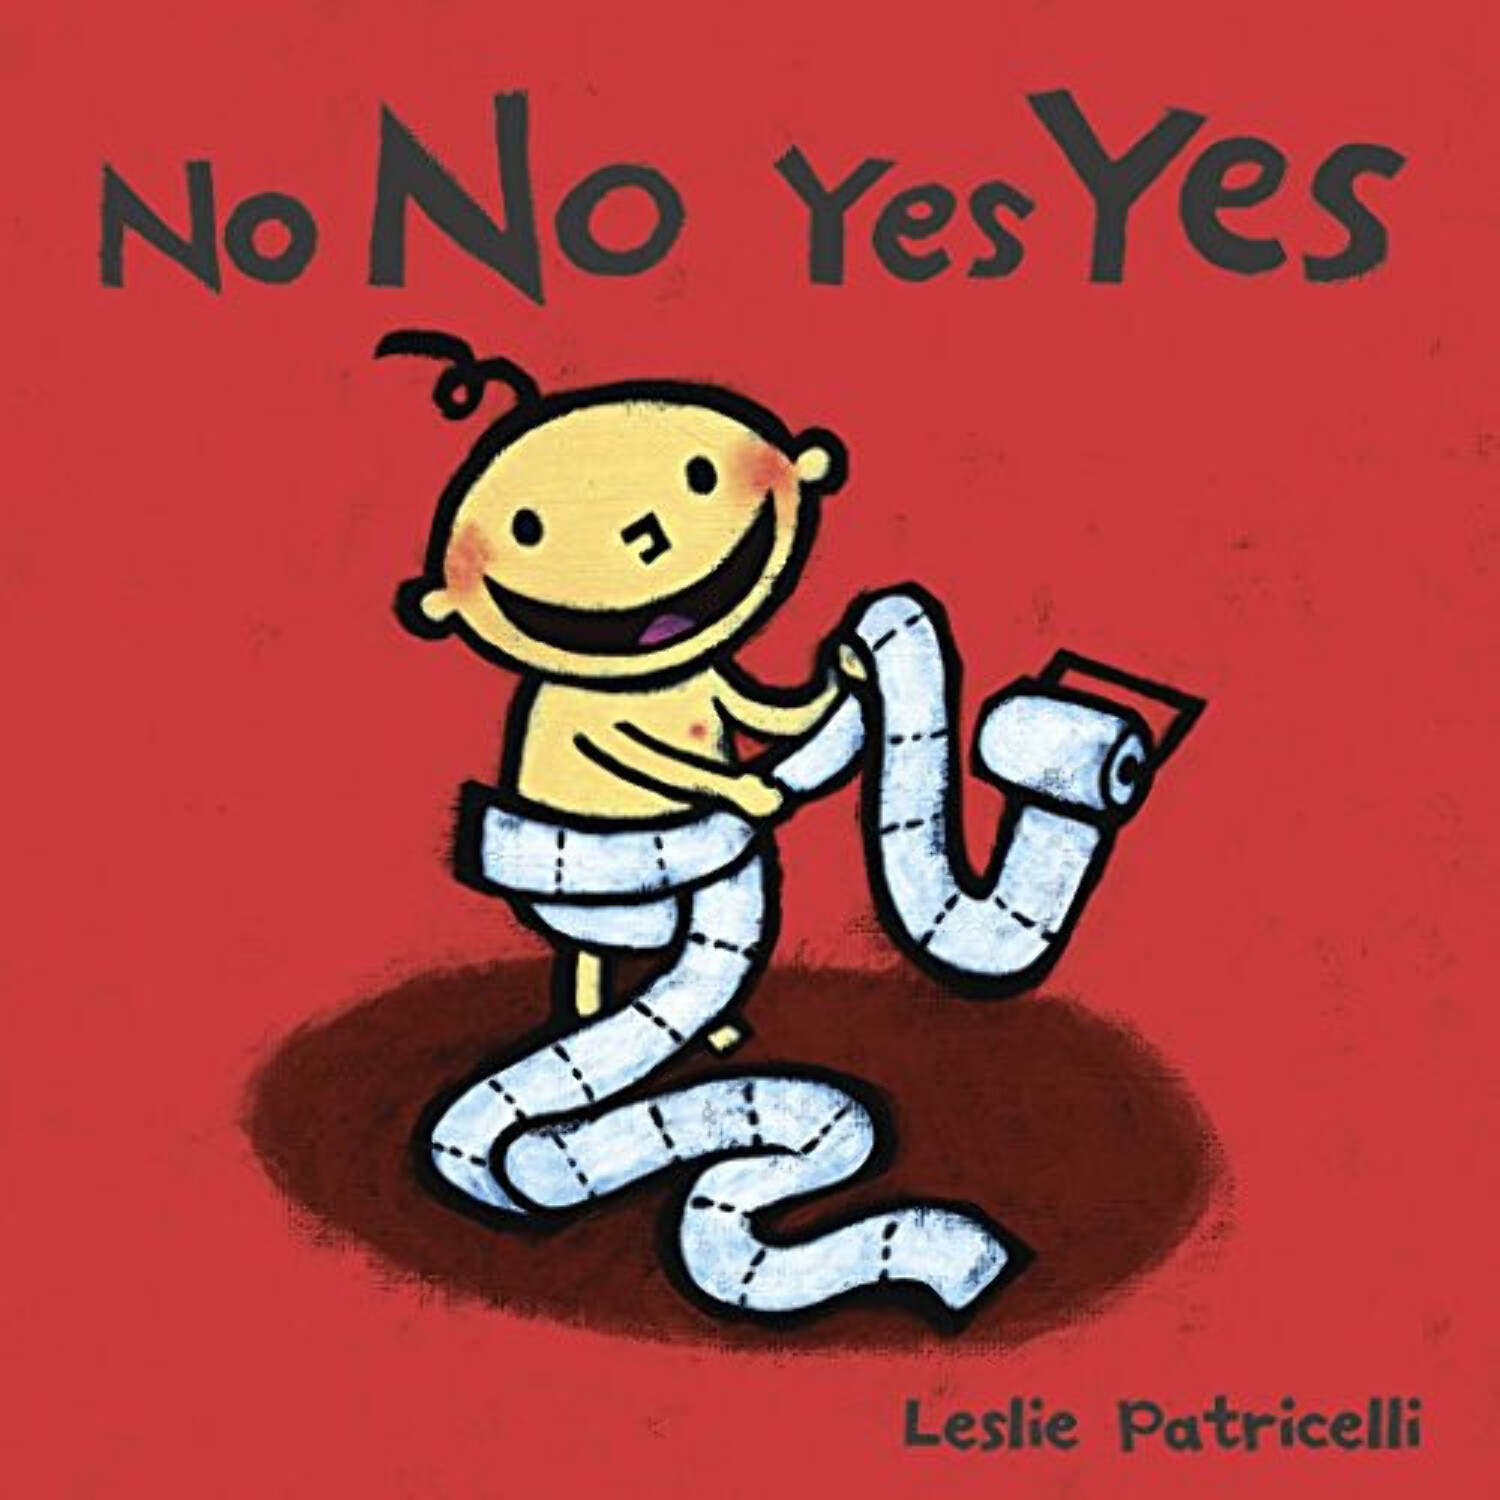 Leslie Patricelli board books: No No Yes Yes (Board book) - image 1 of 1